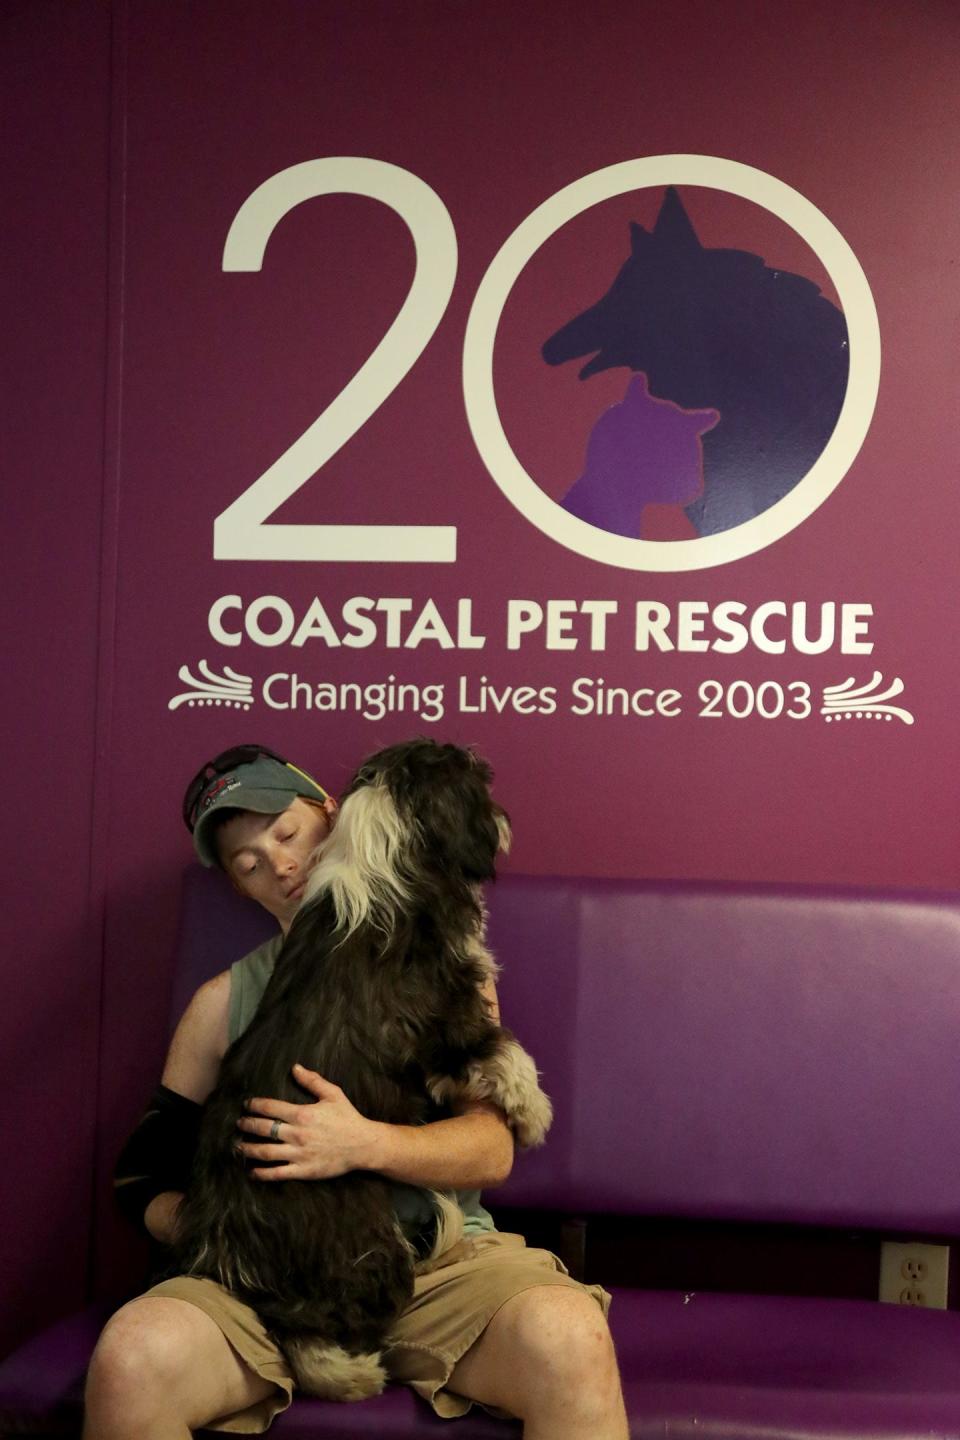 Coastal Pet Rescue volunteer Kallem Counterman holds Stormy, one of 21 dogs that have been rescued after being abandoned in the same area.